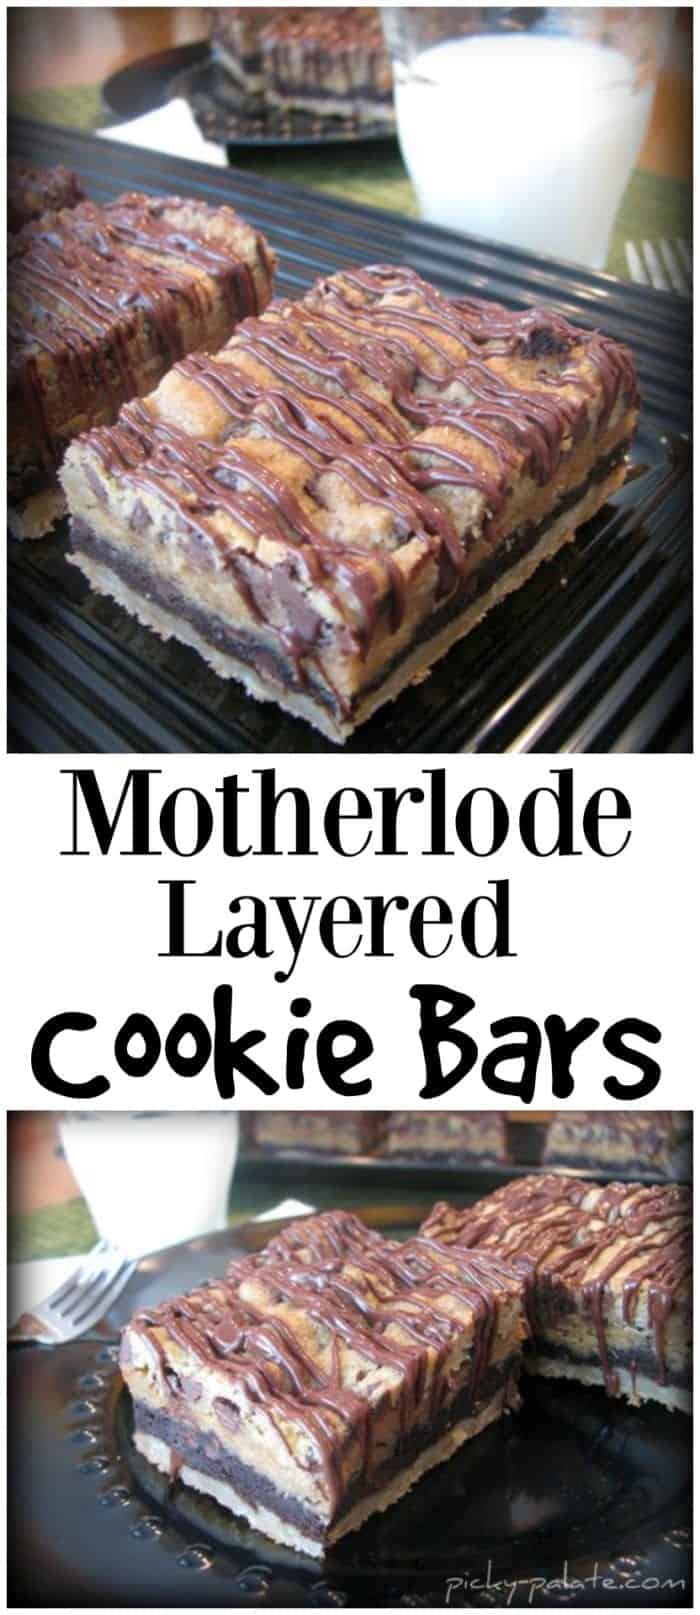 The Motherlode Layered Cookie Bars Best Cookie Recipe Of All Time